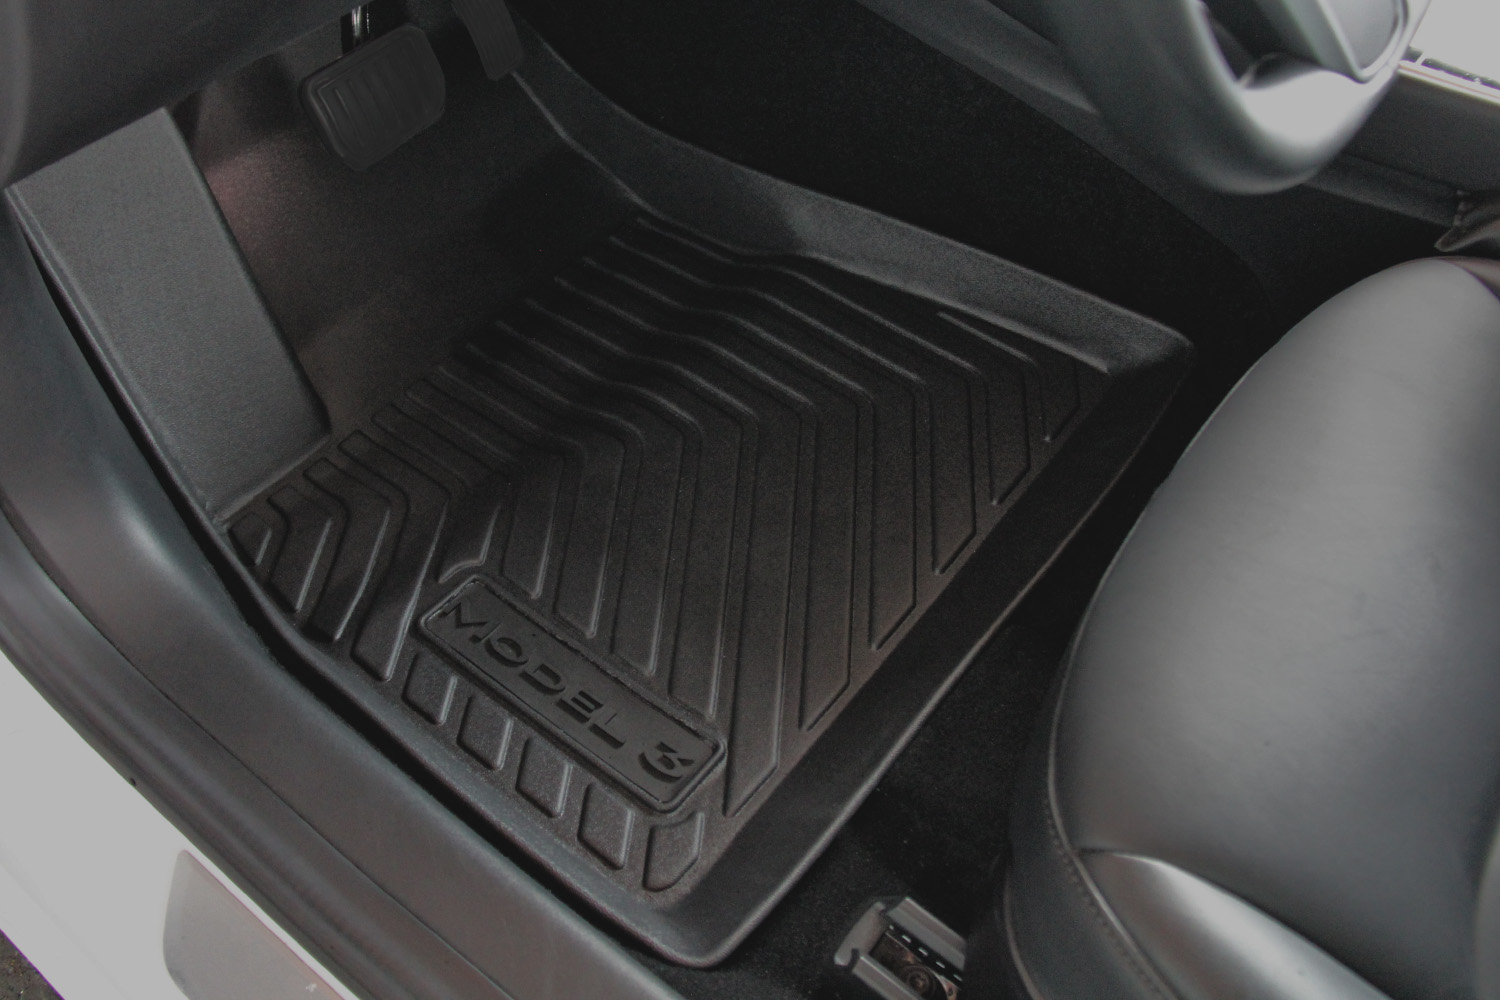 Model Y Floor and Cargo Mats Bundle - 5 Seater - Tesloid Canada